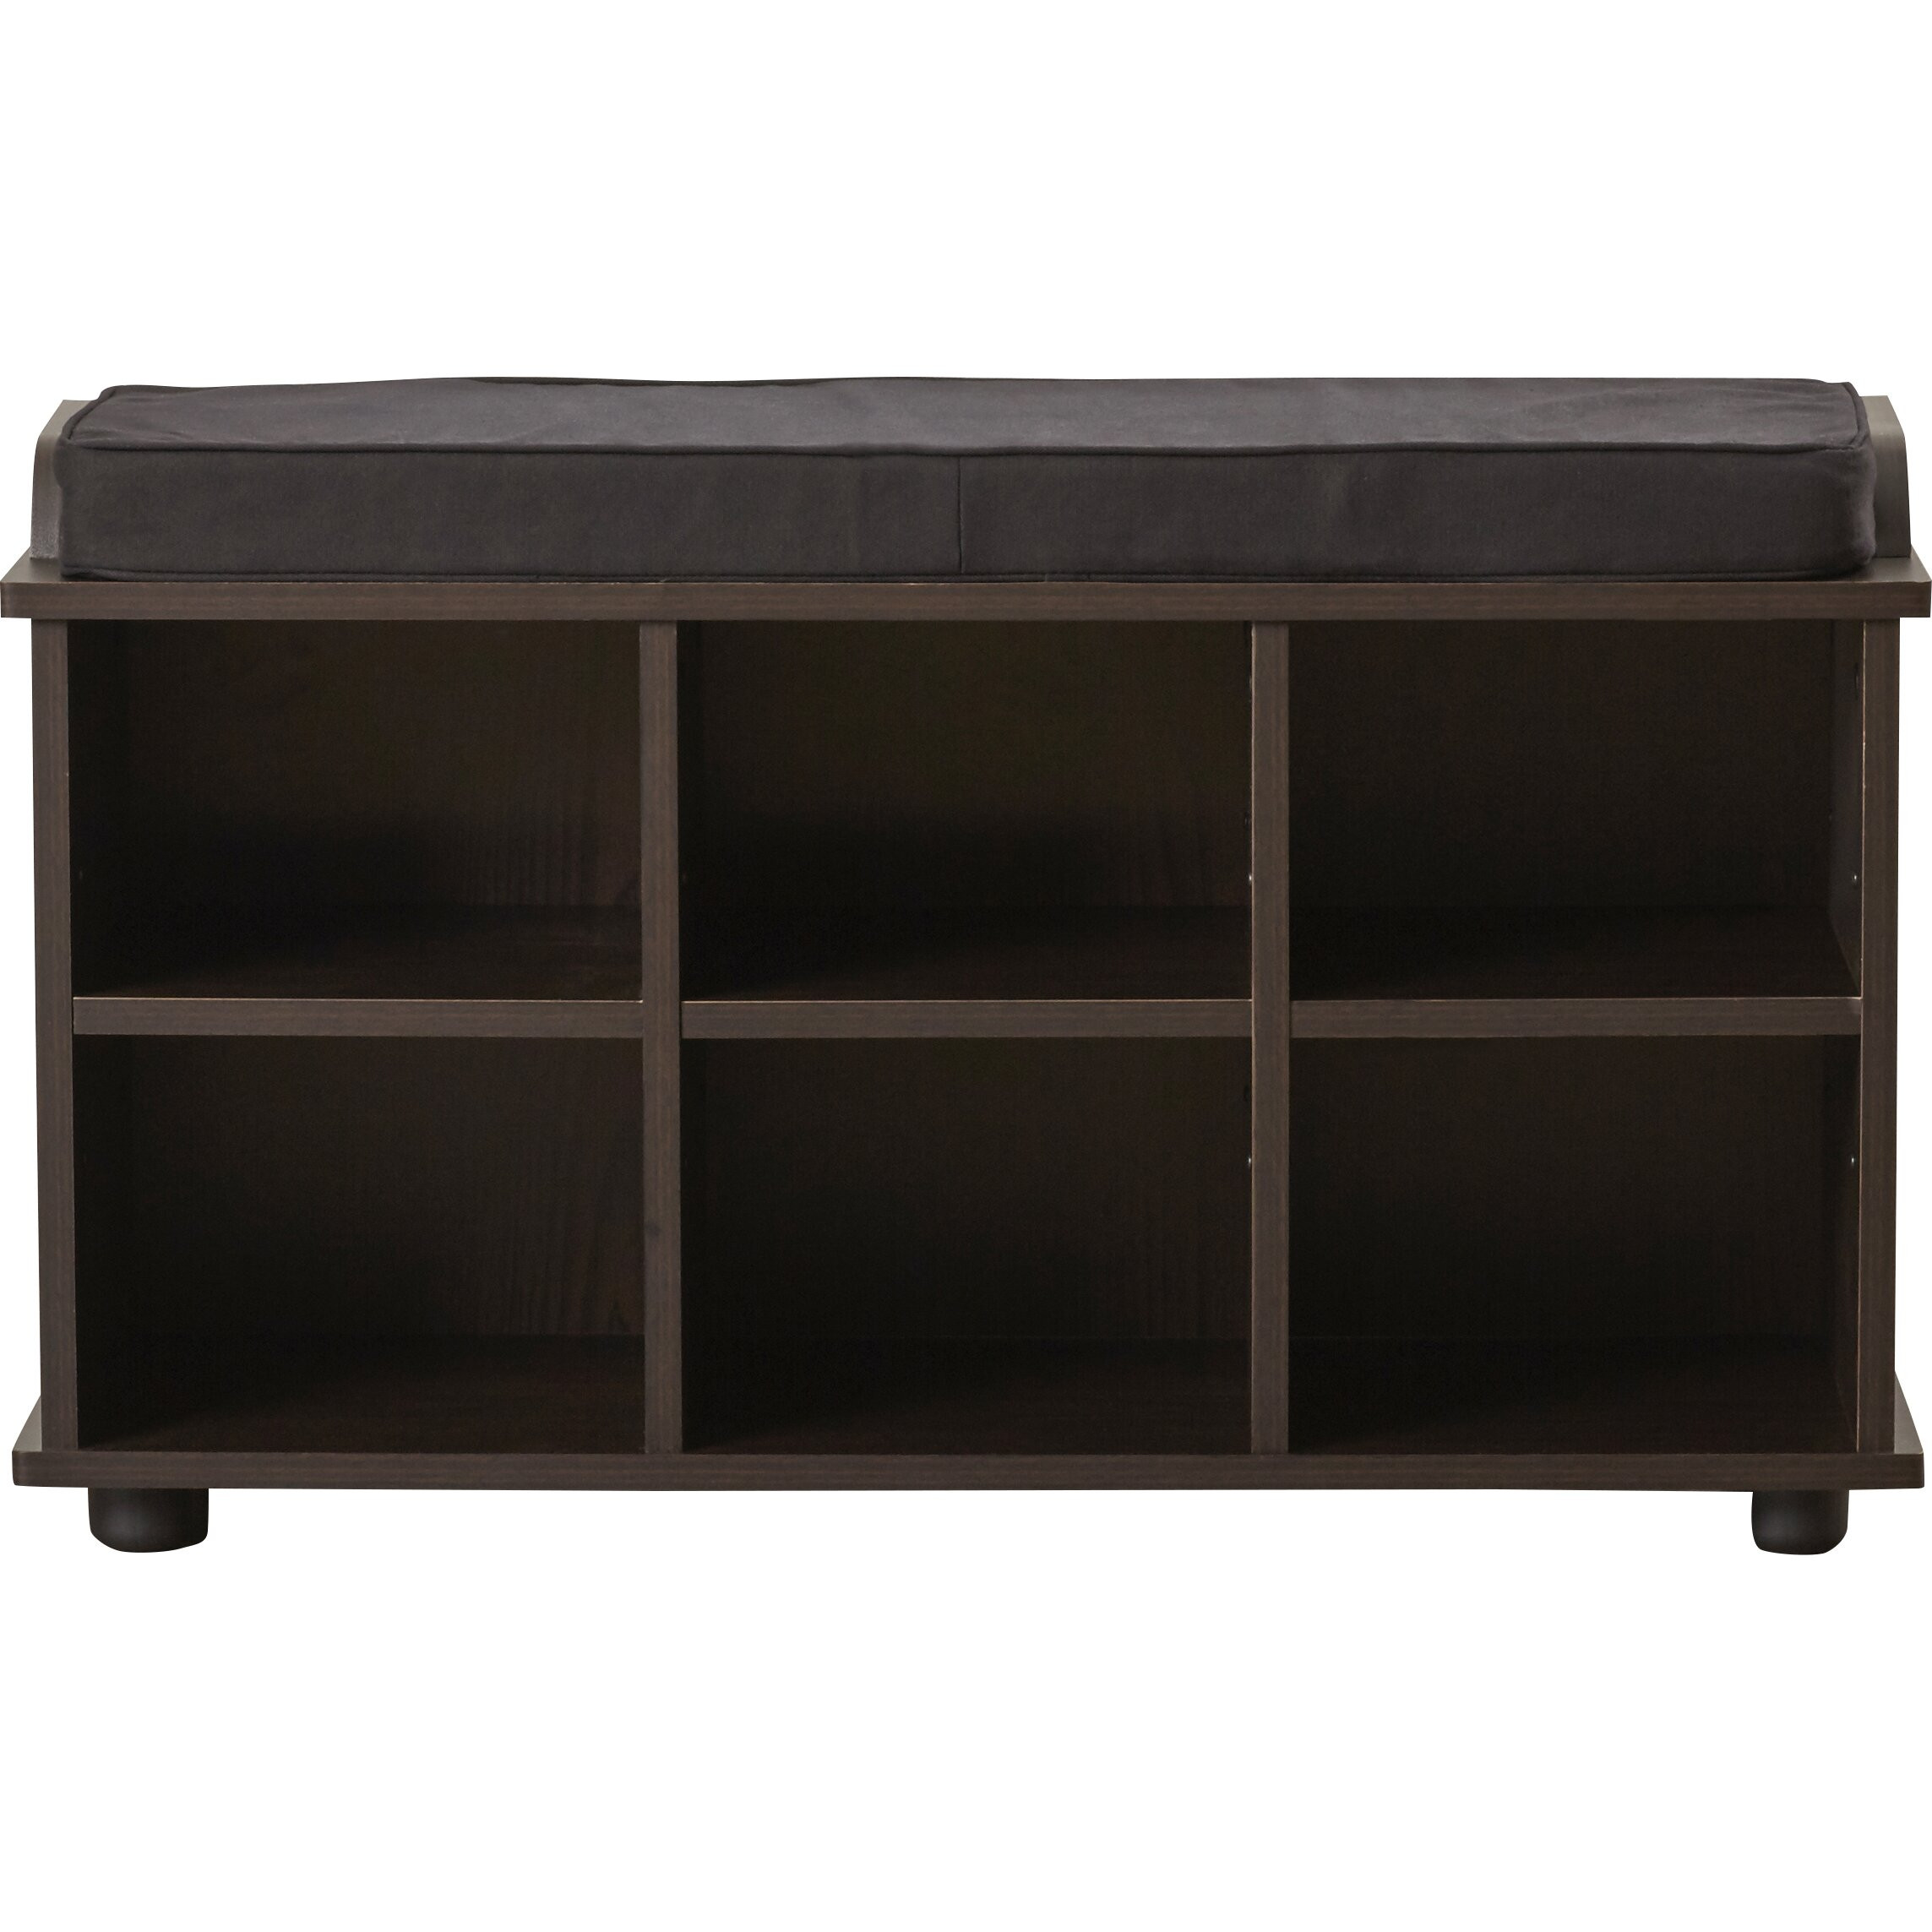 Cubby Storage Bench
 Charlton Home 6 Cubby Storage Entryway Bench & Reviews